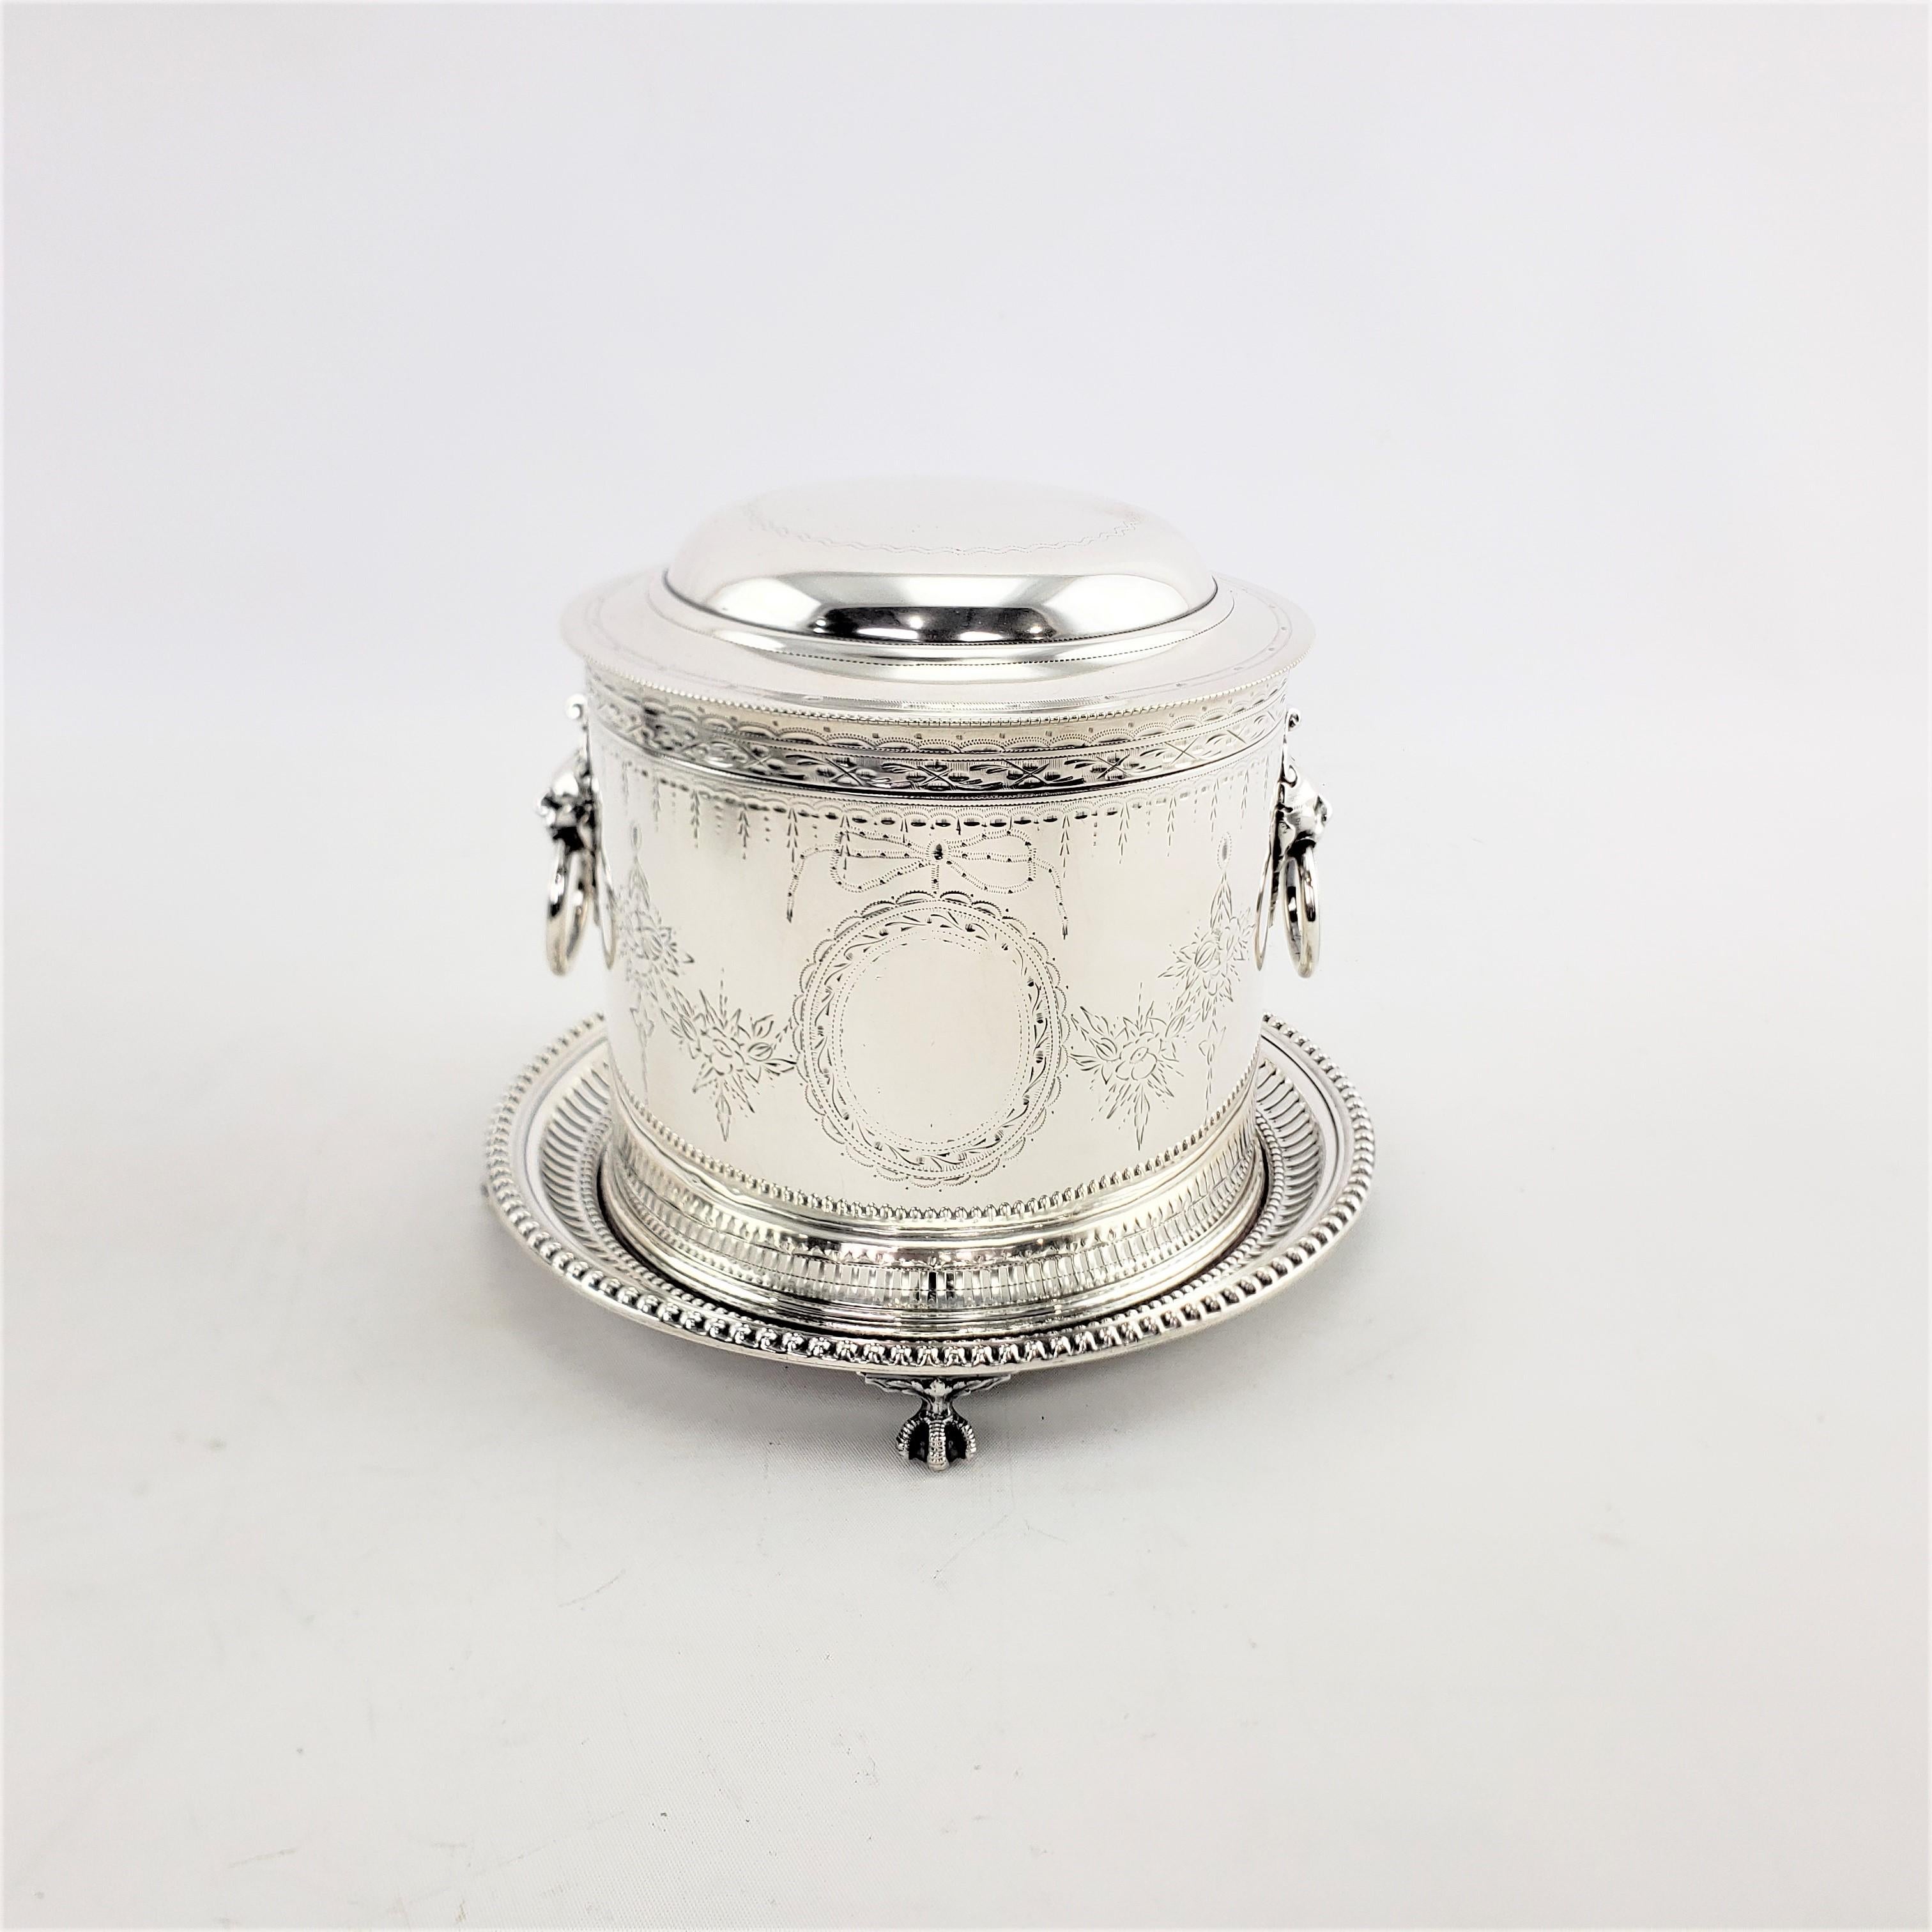 This silver plated biscuit barrel is hallmarked by an unknown maker, and originates from England and dating to approximately 1910 and done in the period Edwardian style. This biscuit barrel has a hinged lid with ornately cast lion mounted handles on